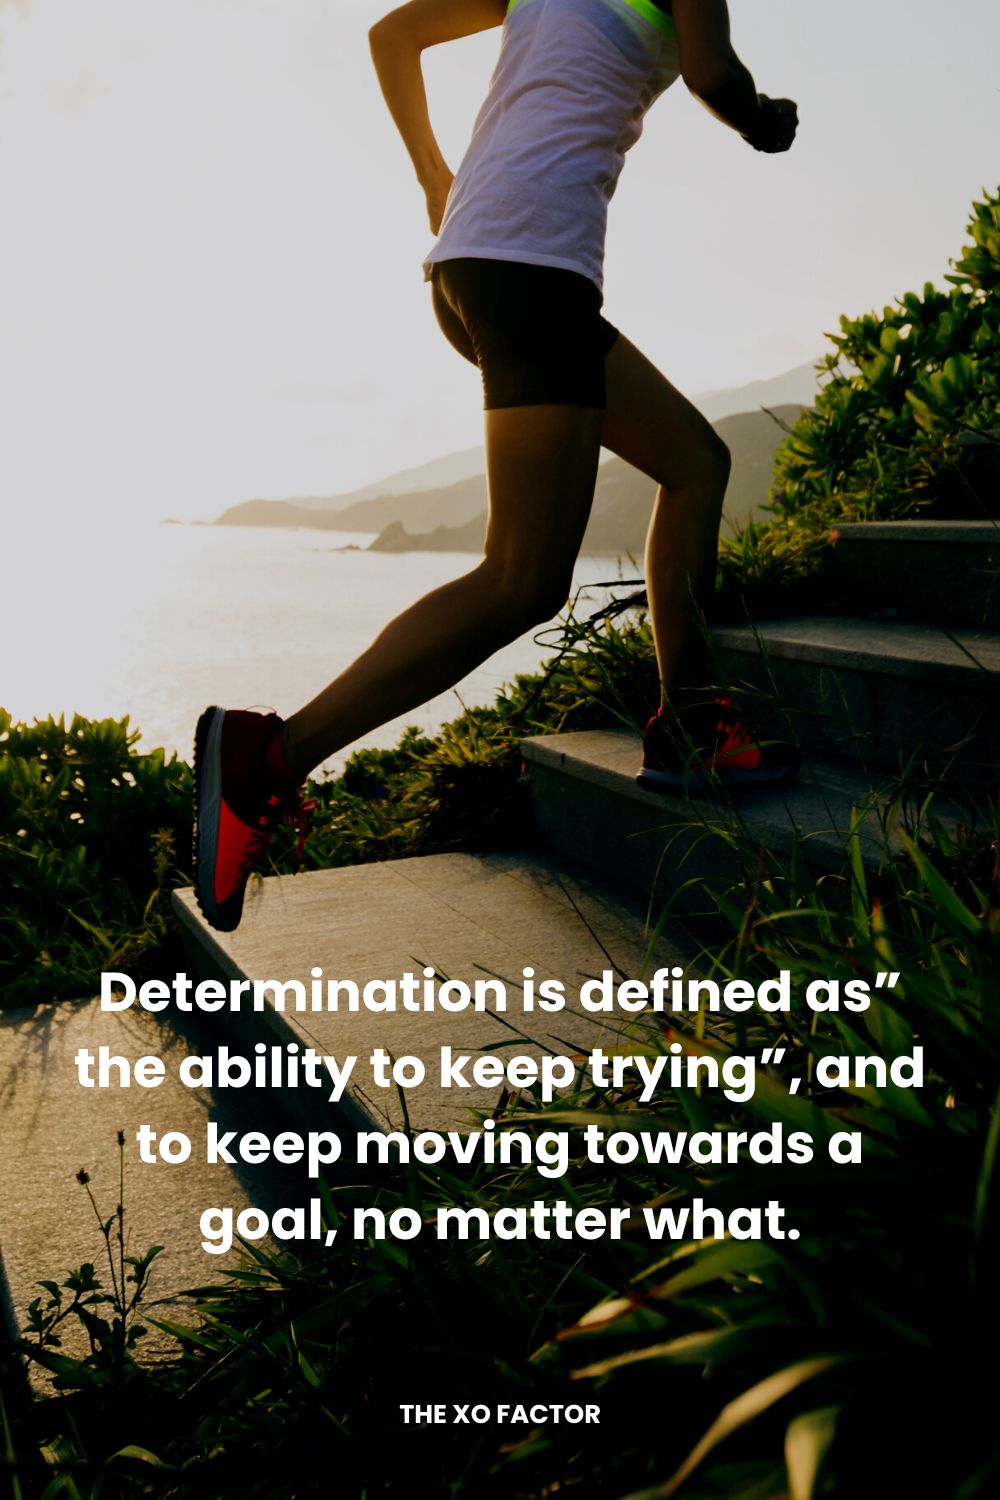 Determination is defined as” the ability to keep trying”, and to keep moving towards a goal, no matter what.